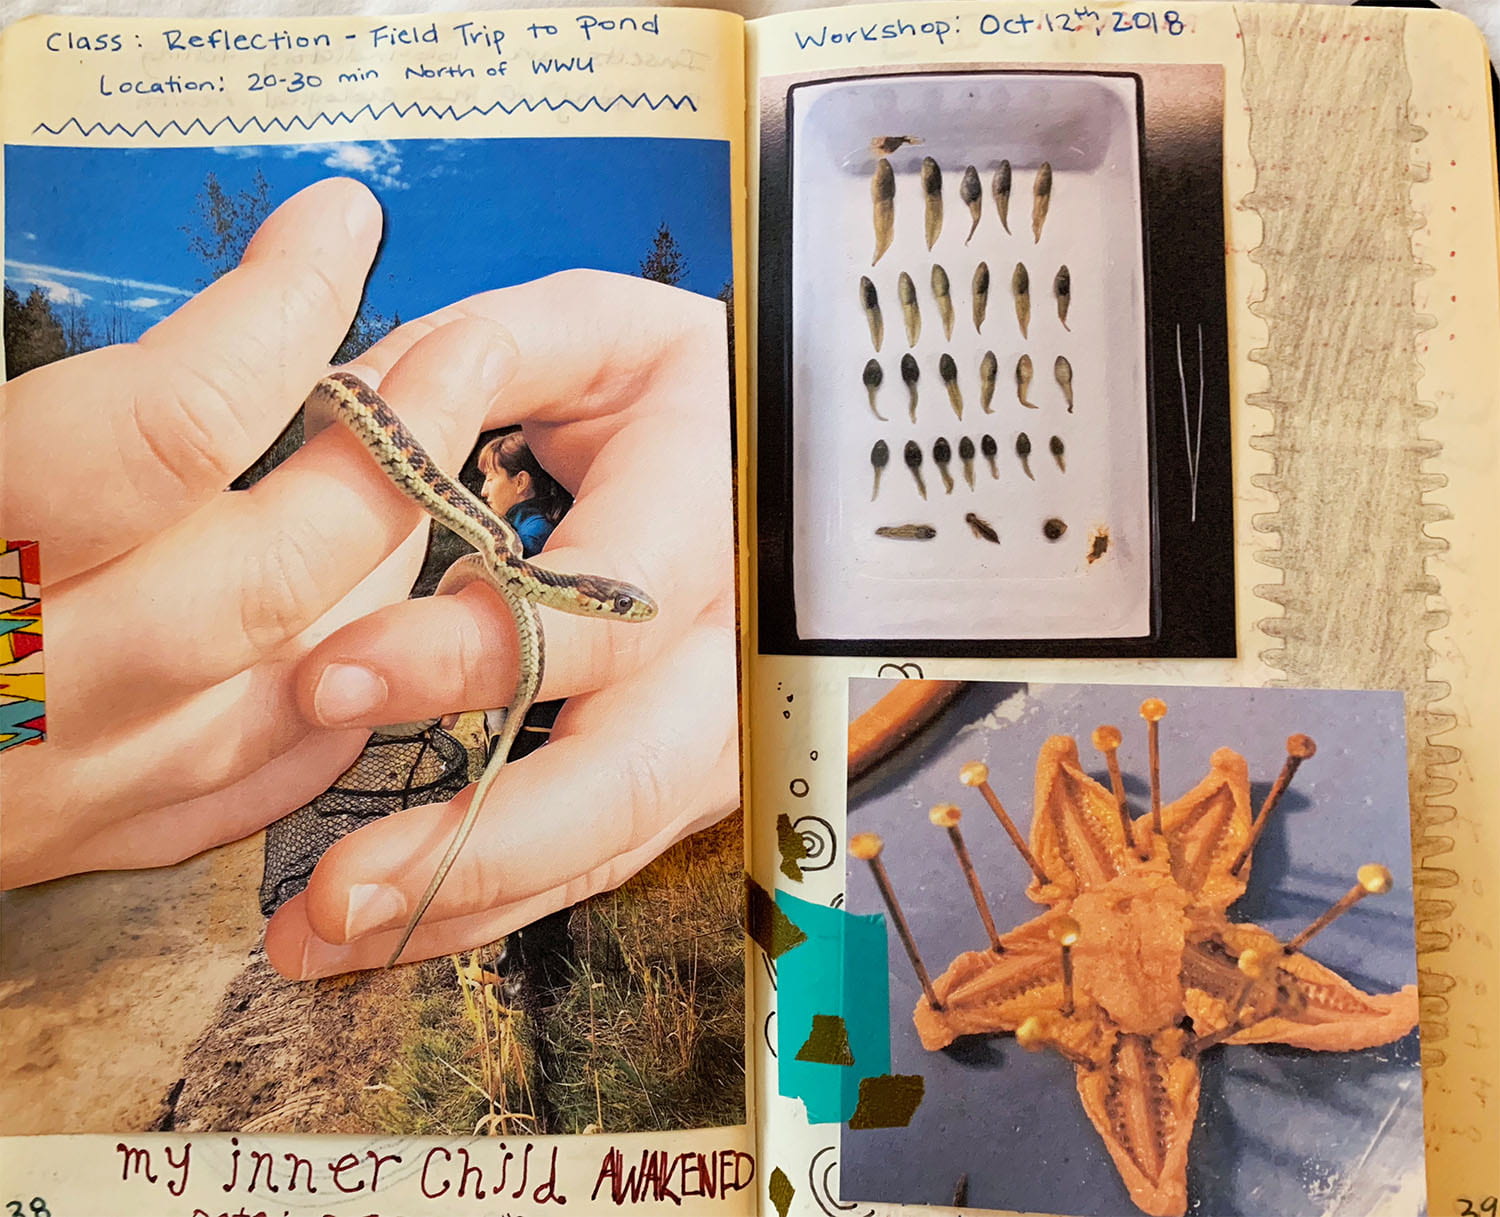 an open scrapbook showing a photo of a person handling a snake, titled My Inner Child Awakened. Another photo shows tadpoles of different ages lined up in a container next to tweezers. A third photo shows a dead starfish pinned to a surface upside-down